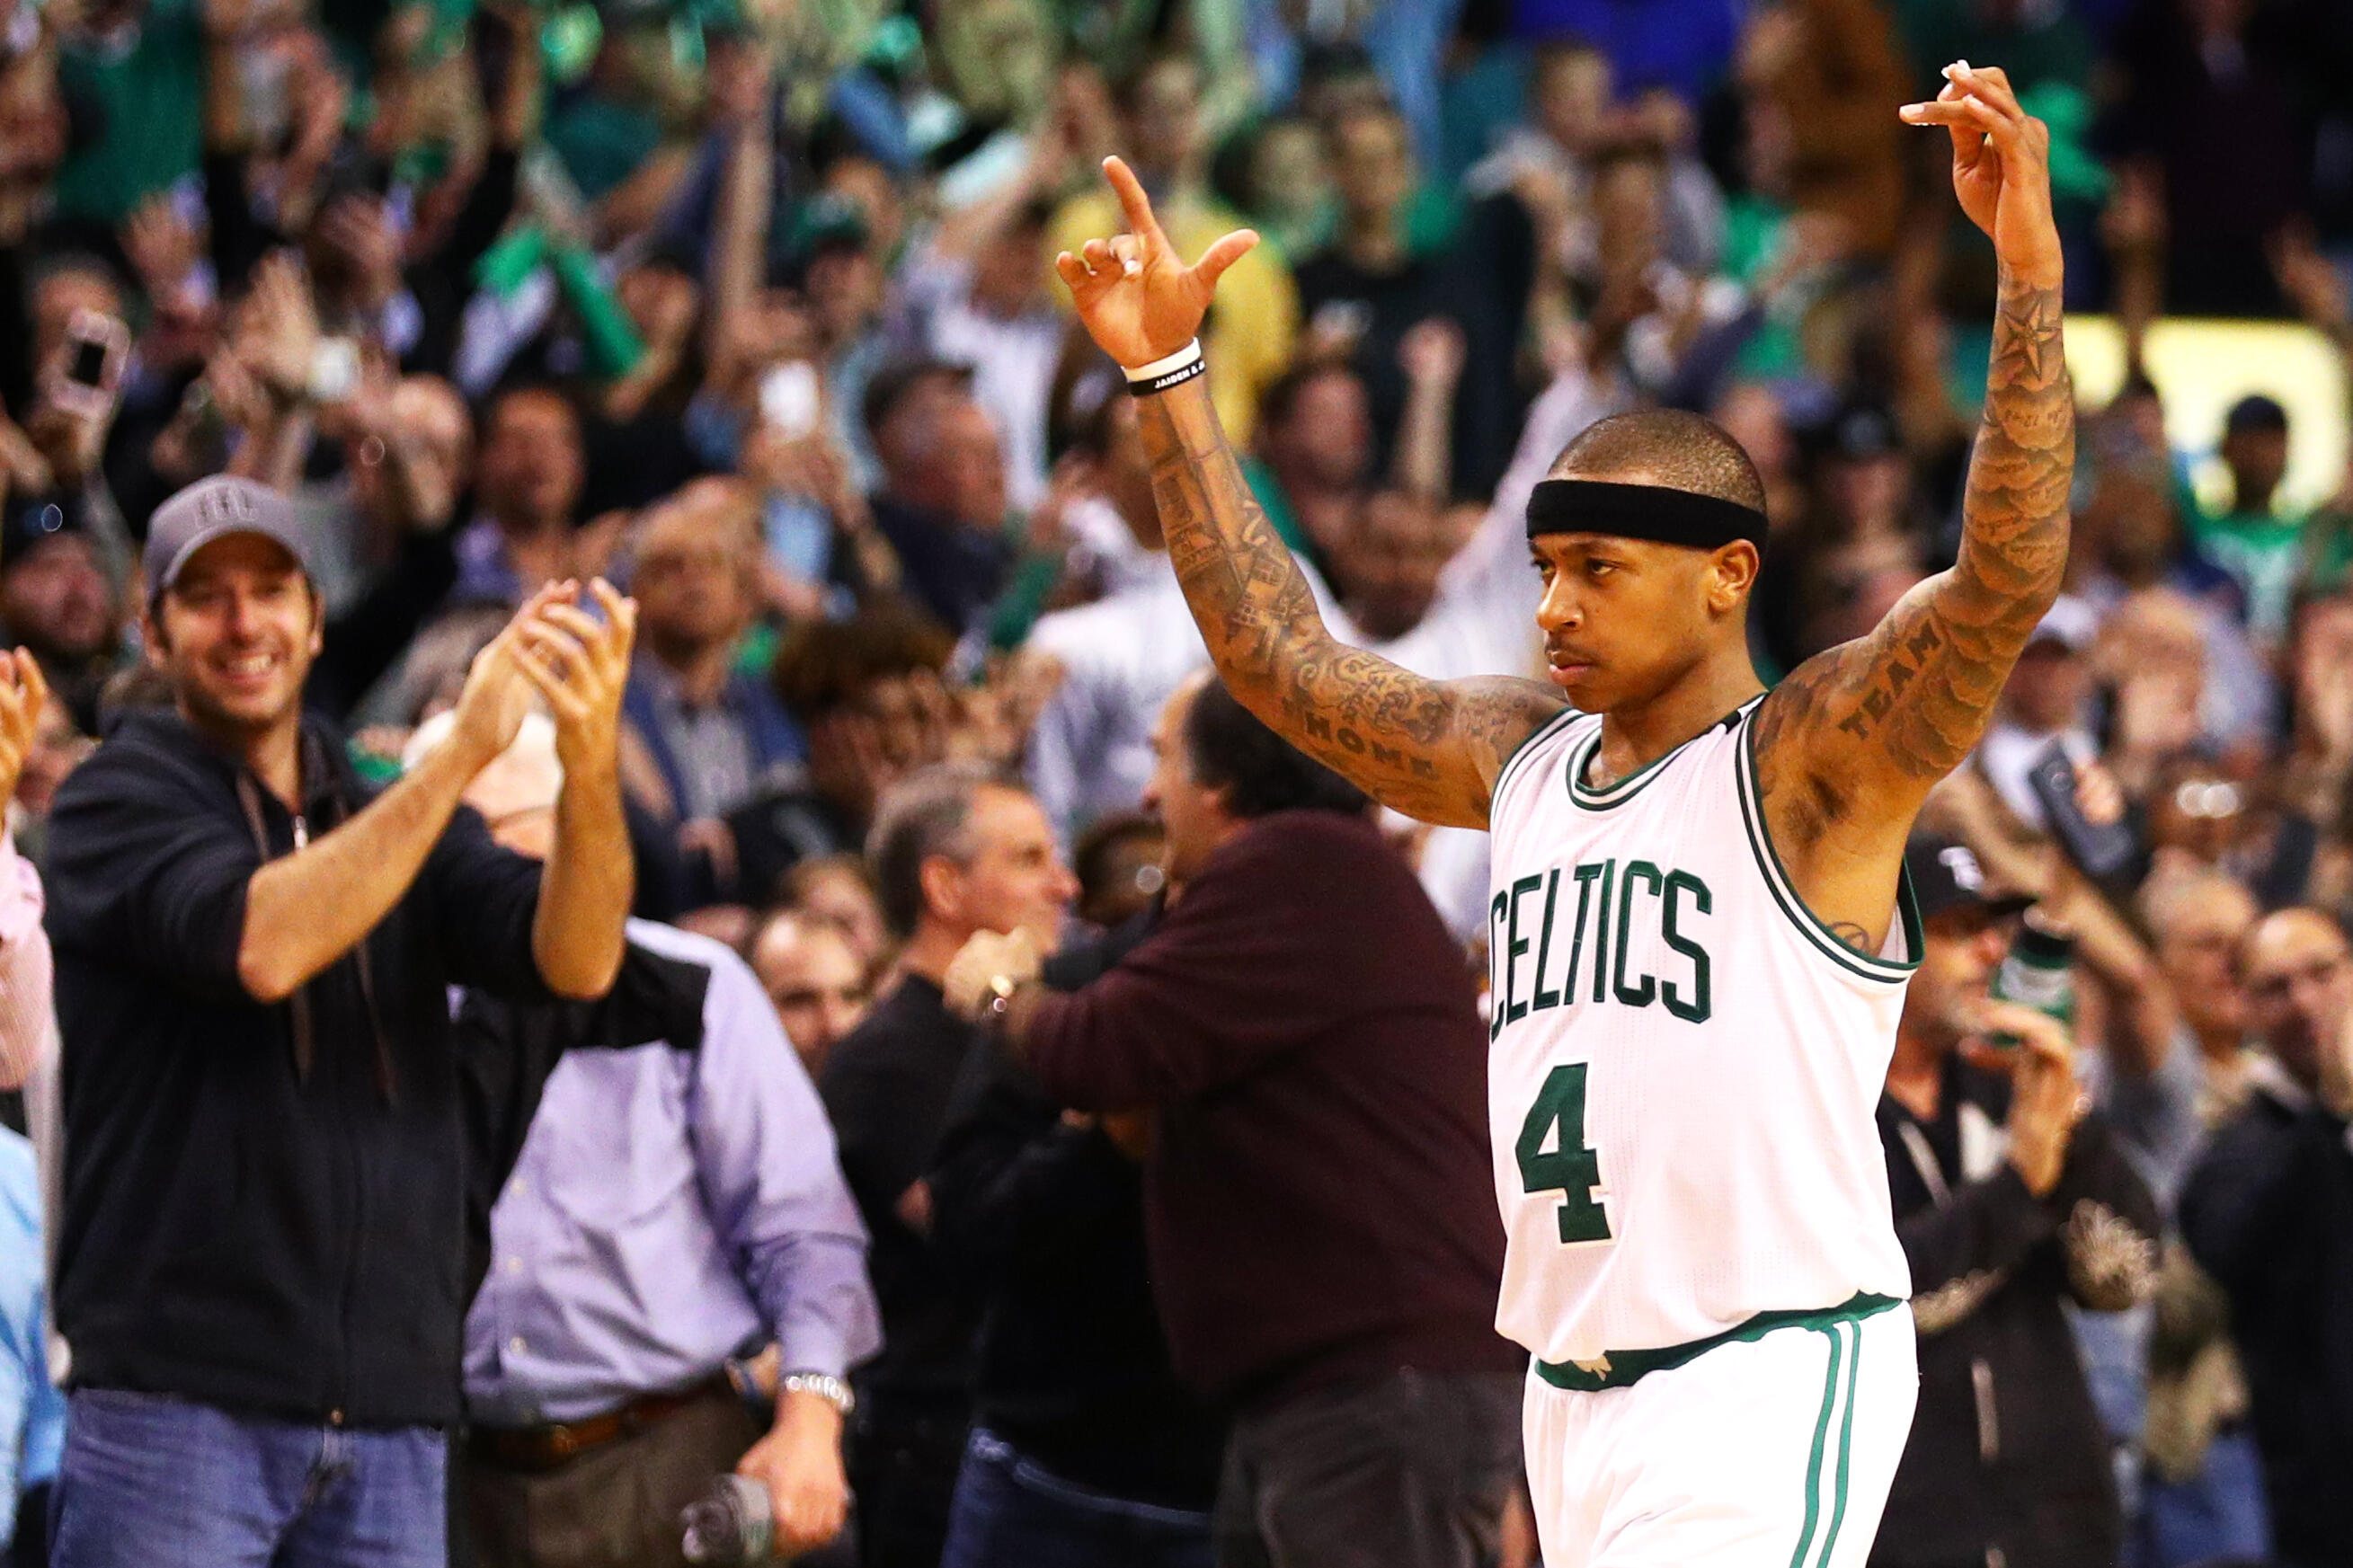 BOSTON, MA - MAY 2: Isaiah Thomas #4 of the Boston Celtics celebrates at the end the Celtics 129-119 overtime win over the Washington Wizards in Game Two of the Eastern Conference Semifinals at TD Garden on May 2, 2017 in Boston, Massachusetts. NOTE TO US